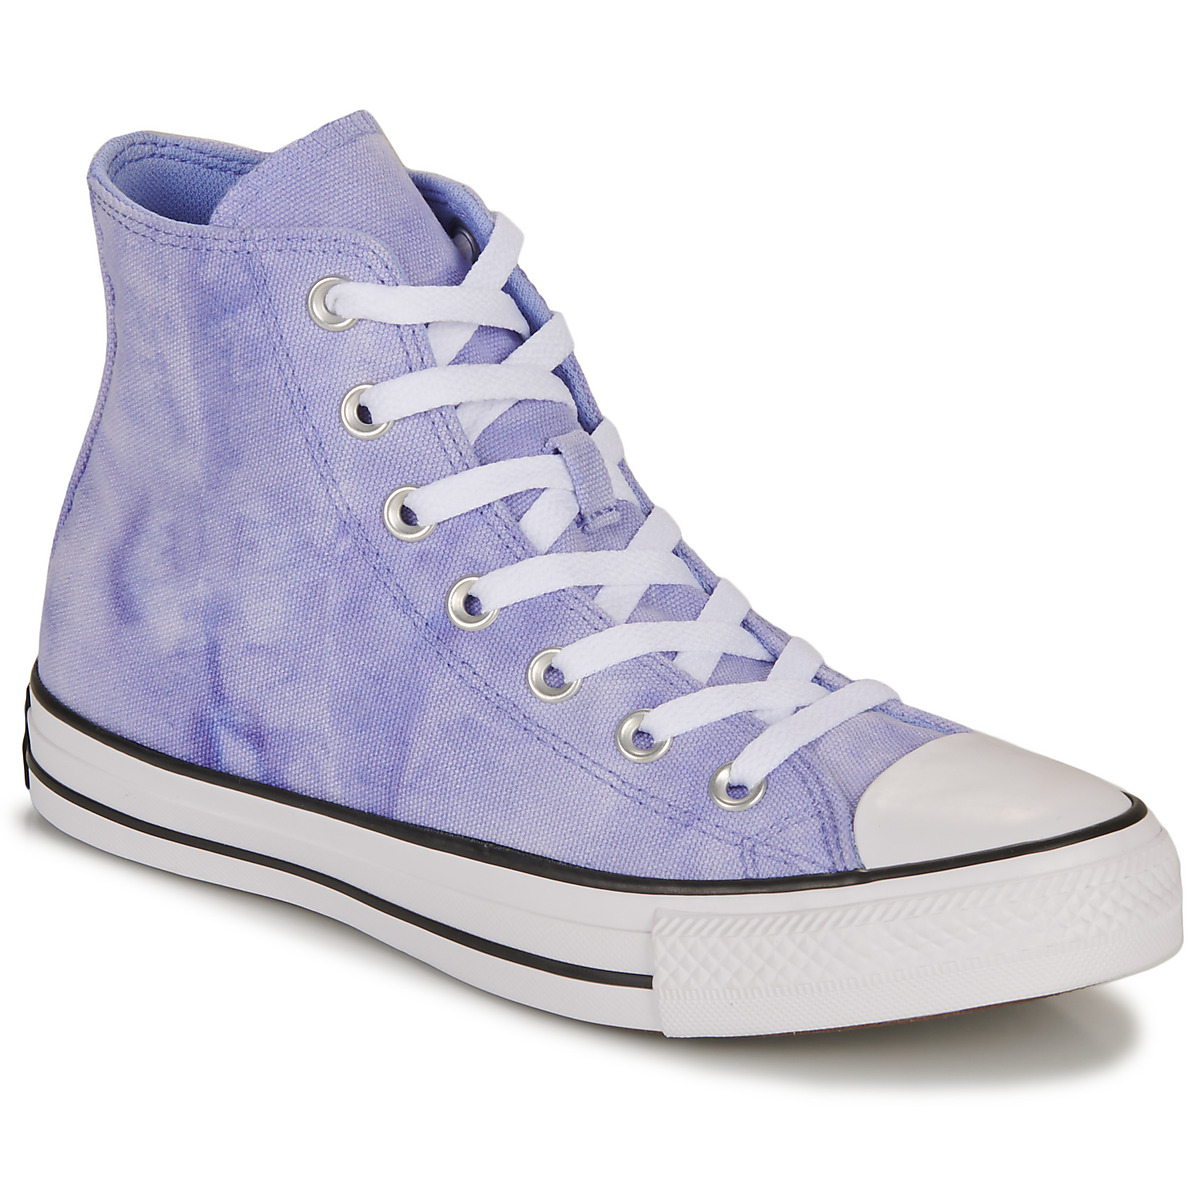 Converse Chuck Taylor All Star Sun Washed Textile